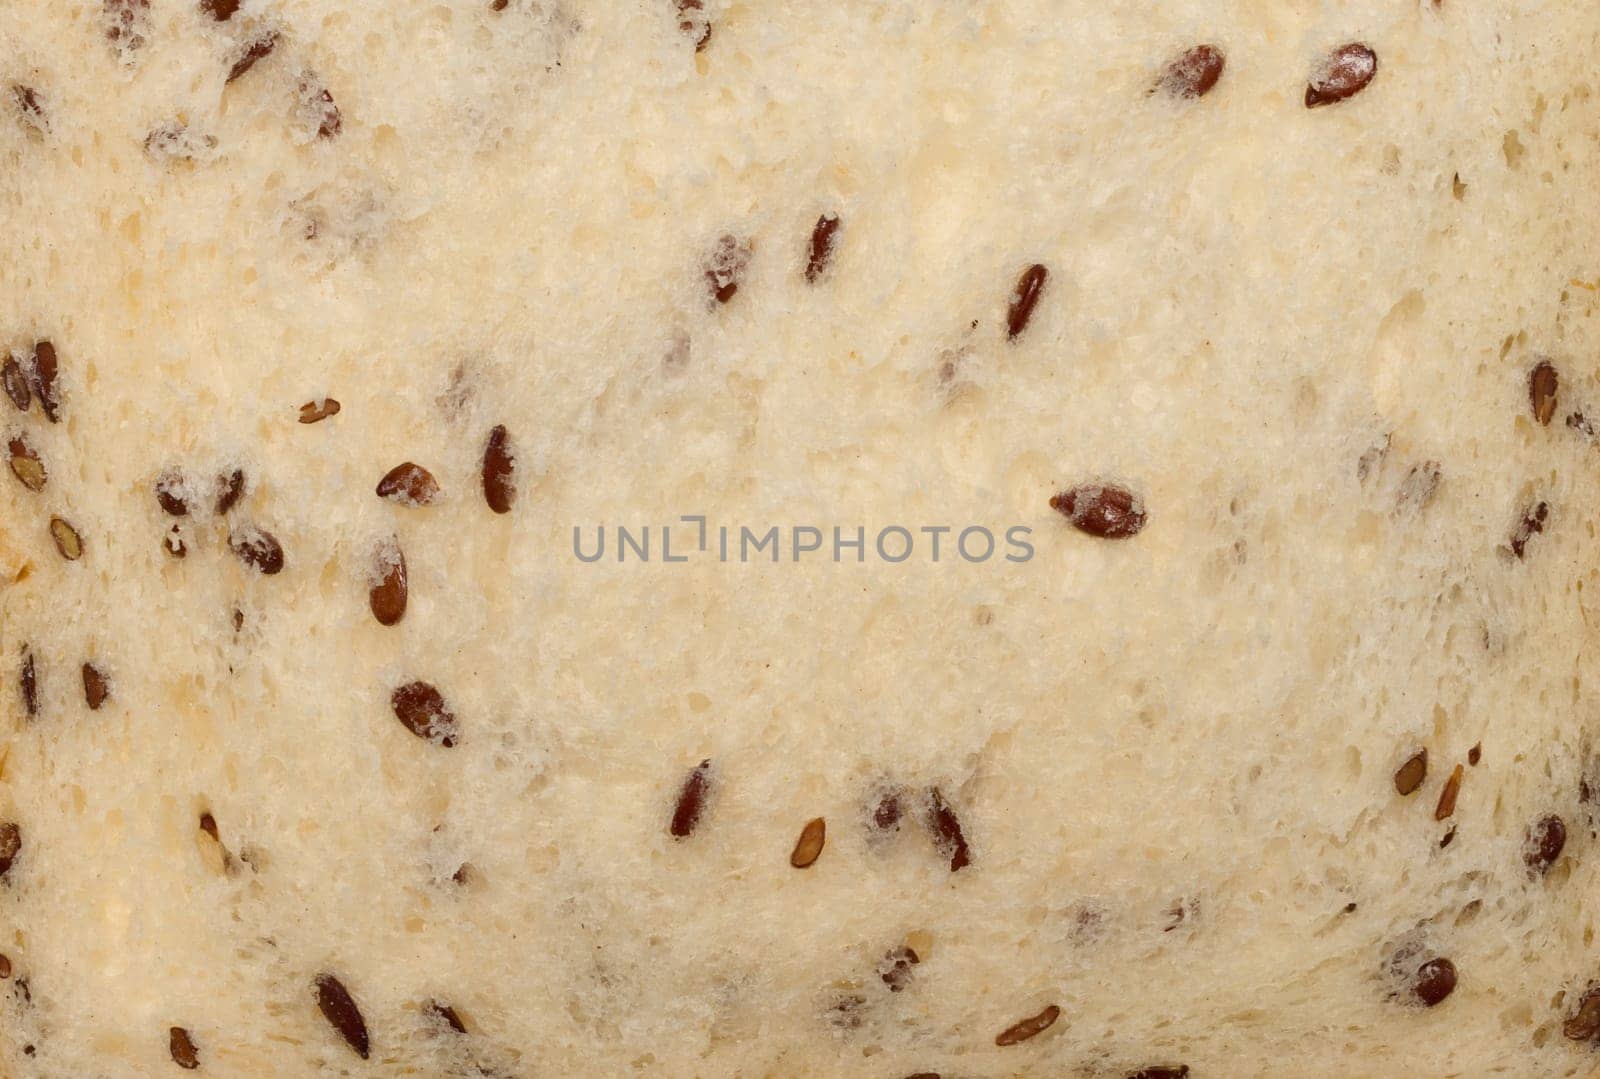 Piece of wheat flour bread with flax seeds, close up